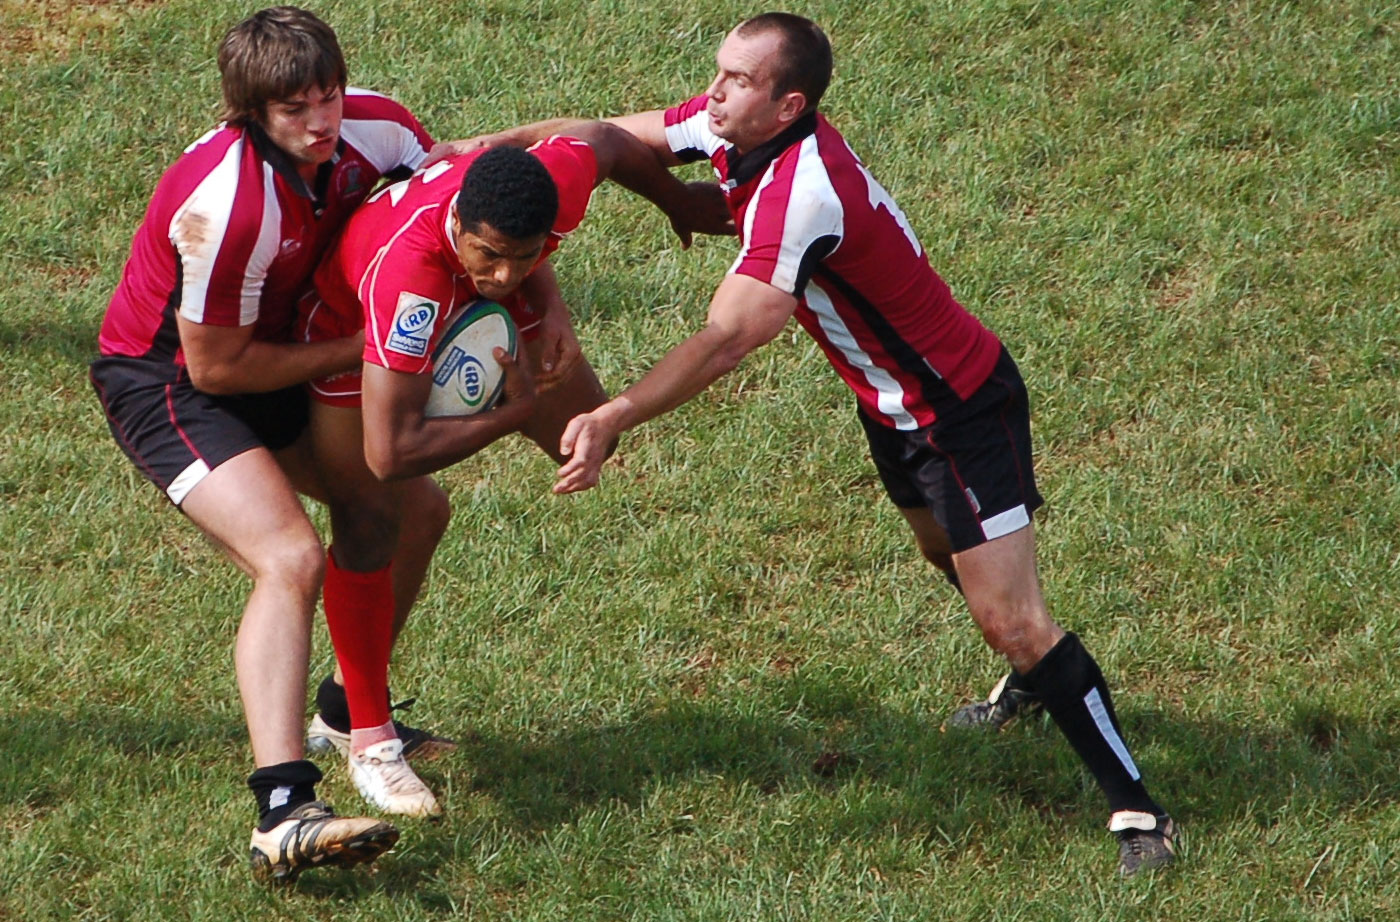 two men playing a game of rugby with a referee watching